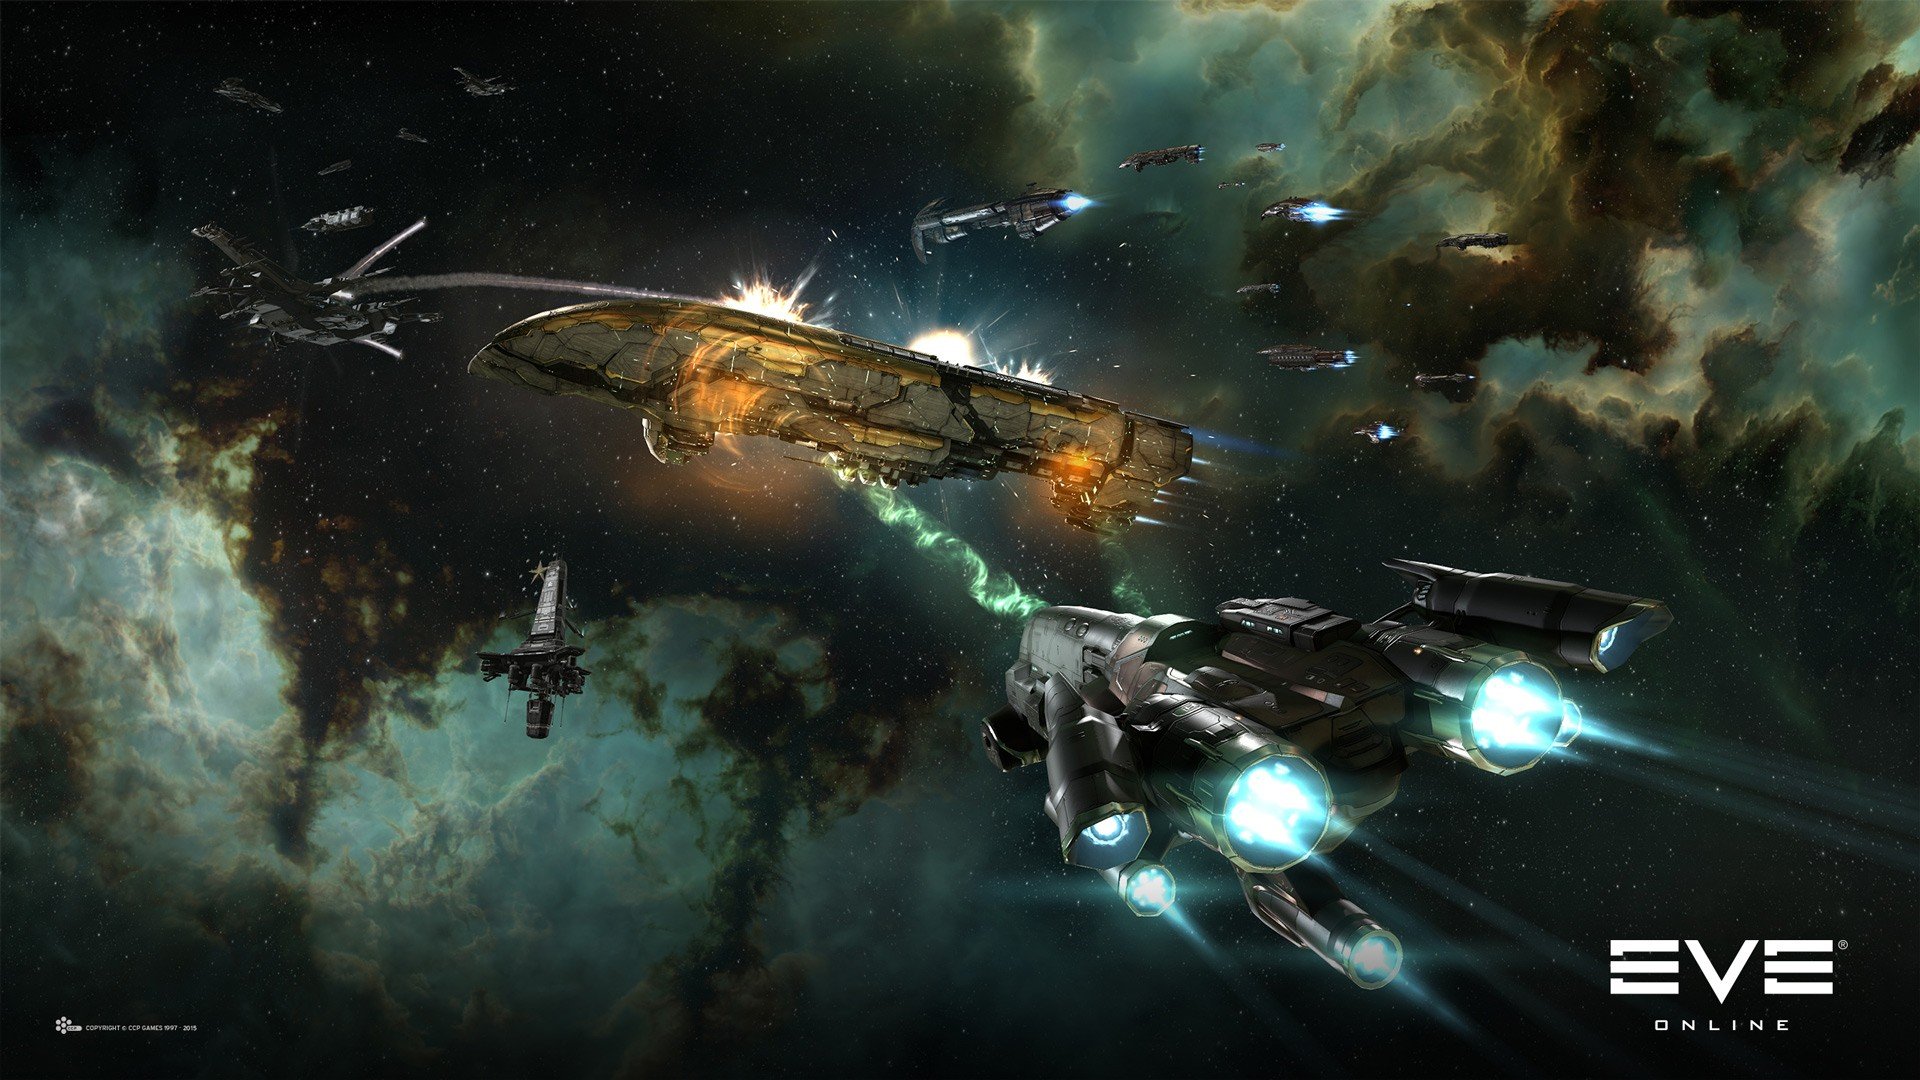 EVE Online, PC gaming, Science fiction Wallpaper